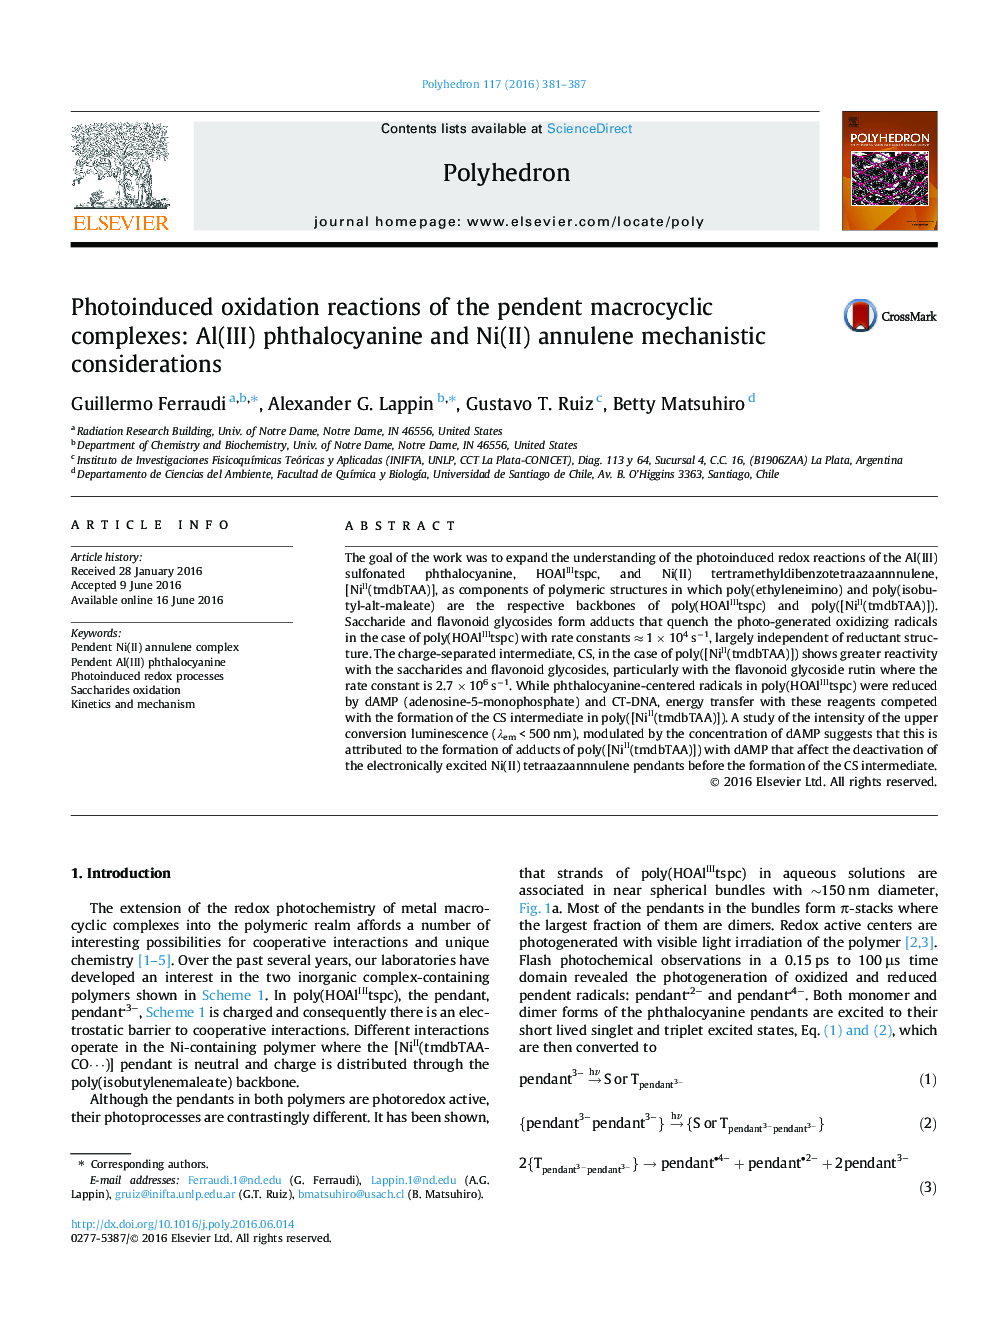 Photoinduced oxidation reactions of the pendent macrocyclic complexes: Al(III) phthalocyanine and Ni(II) annulene mechanistic considerations